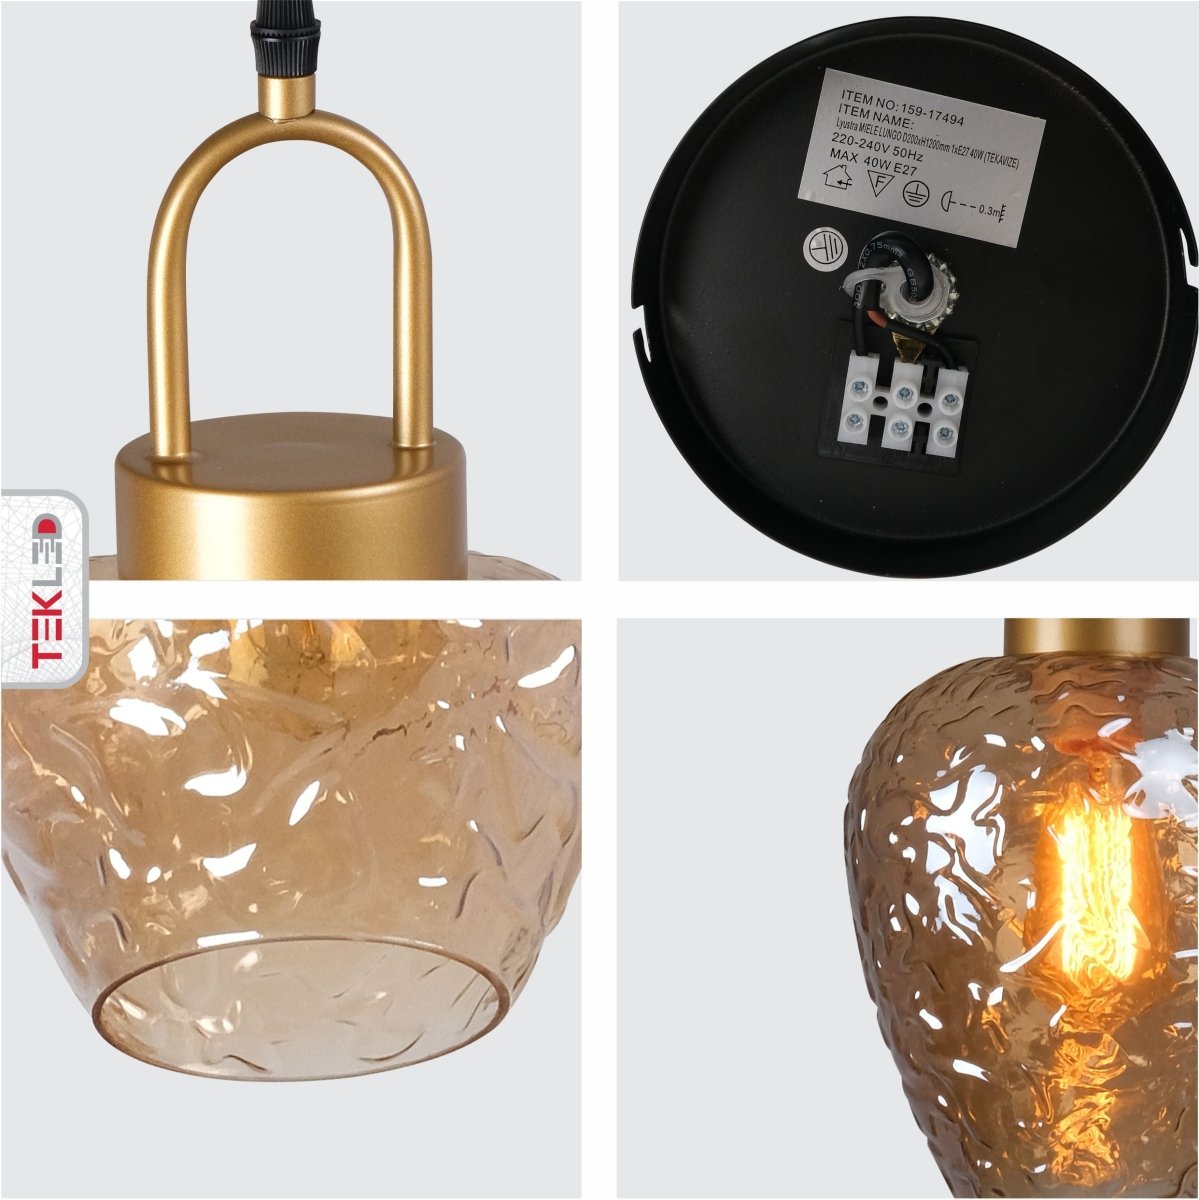 Detailed shots of Miele Lungo Amber Glass Pendant Light with E27 Fitting | TEKLED 159-17494